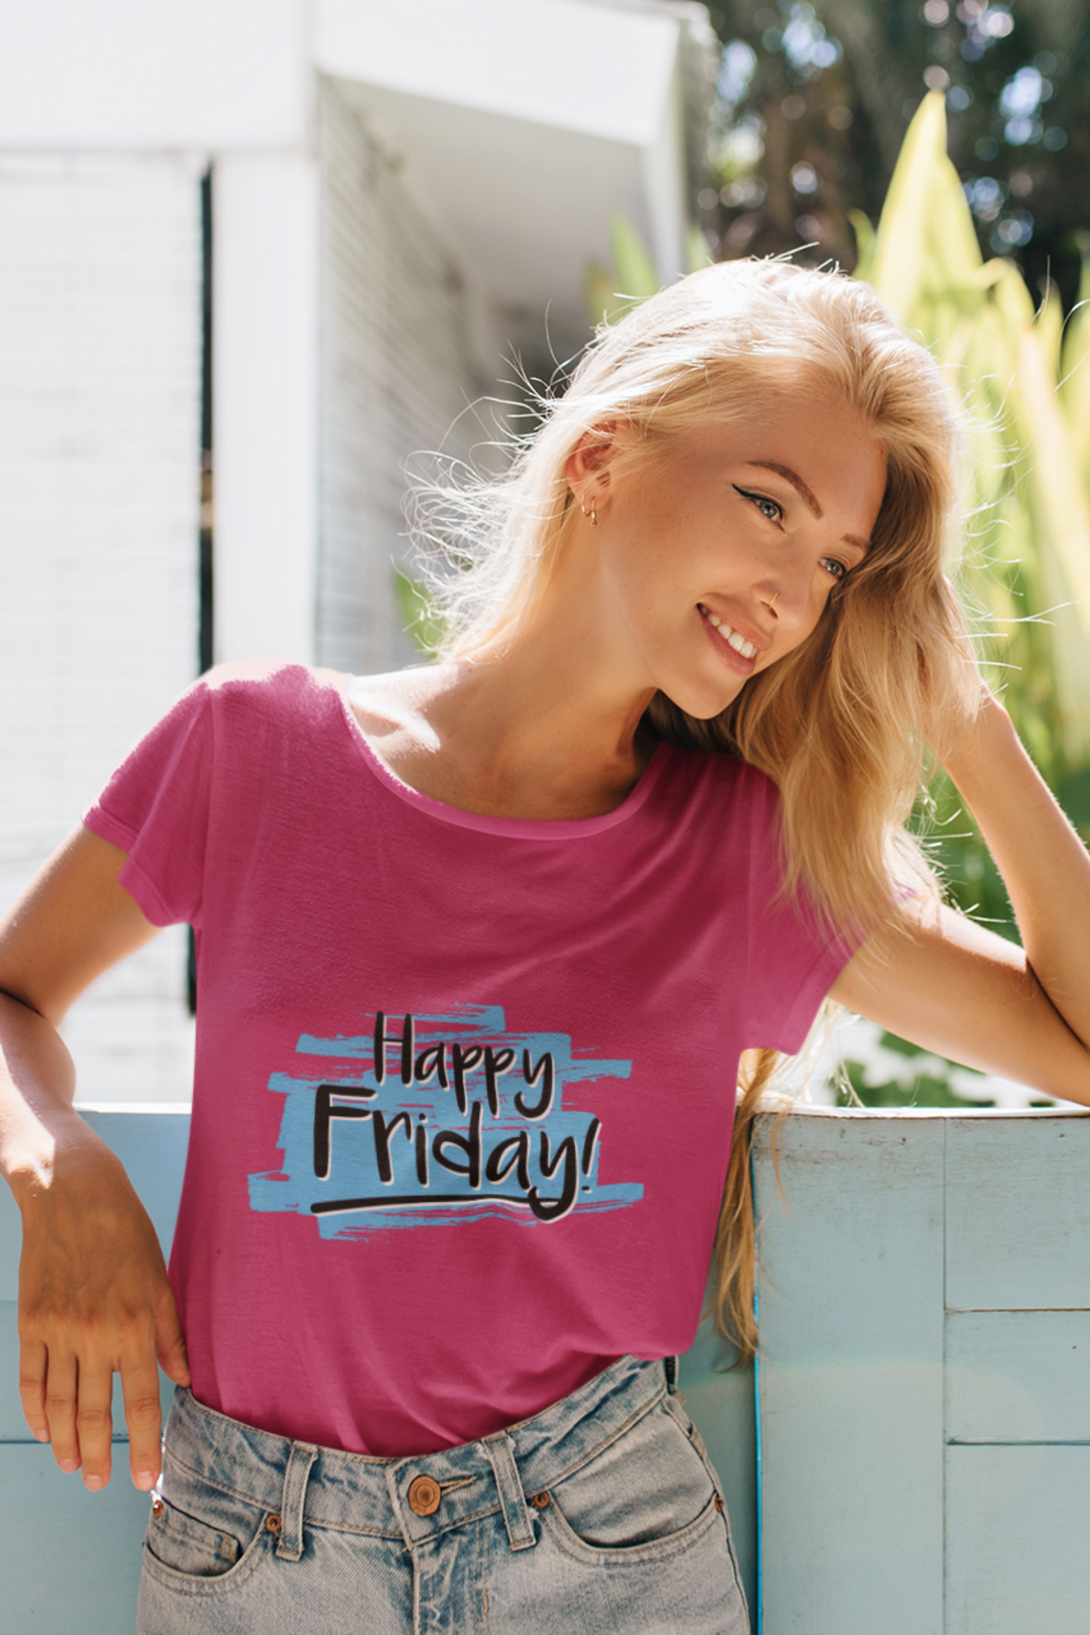 Happy Friday Printed Scoop Neck T-Shirt For Women - WowWaves - 3